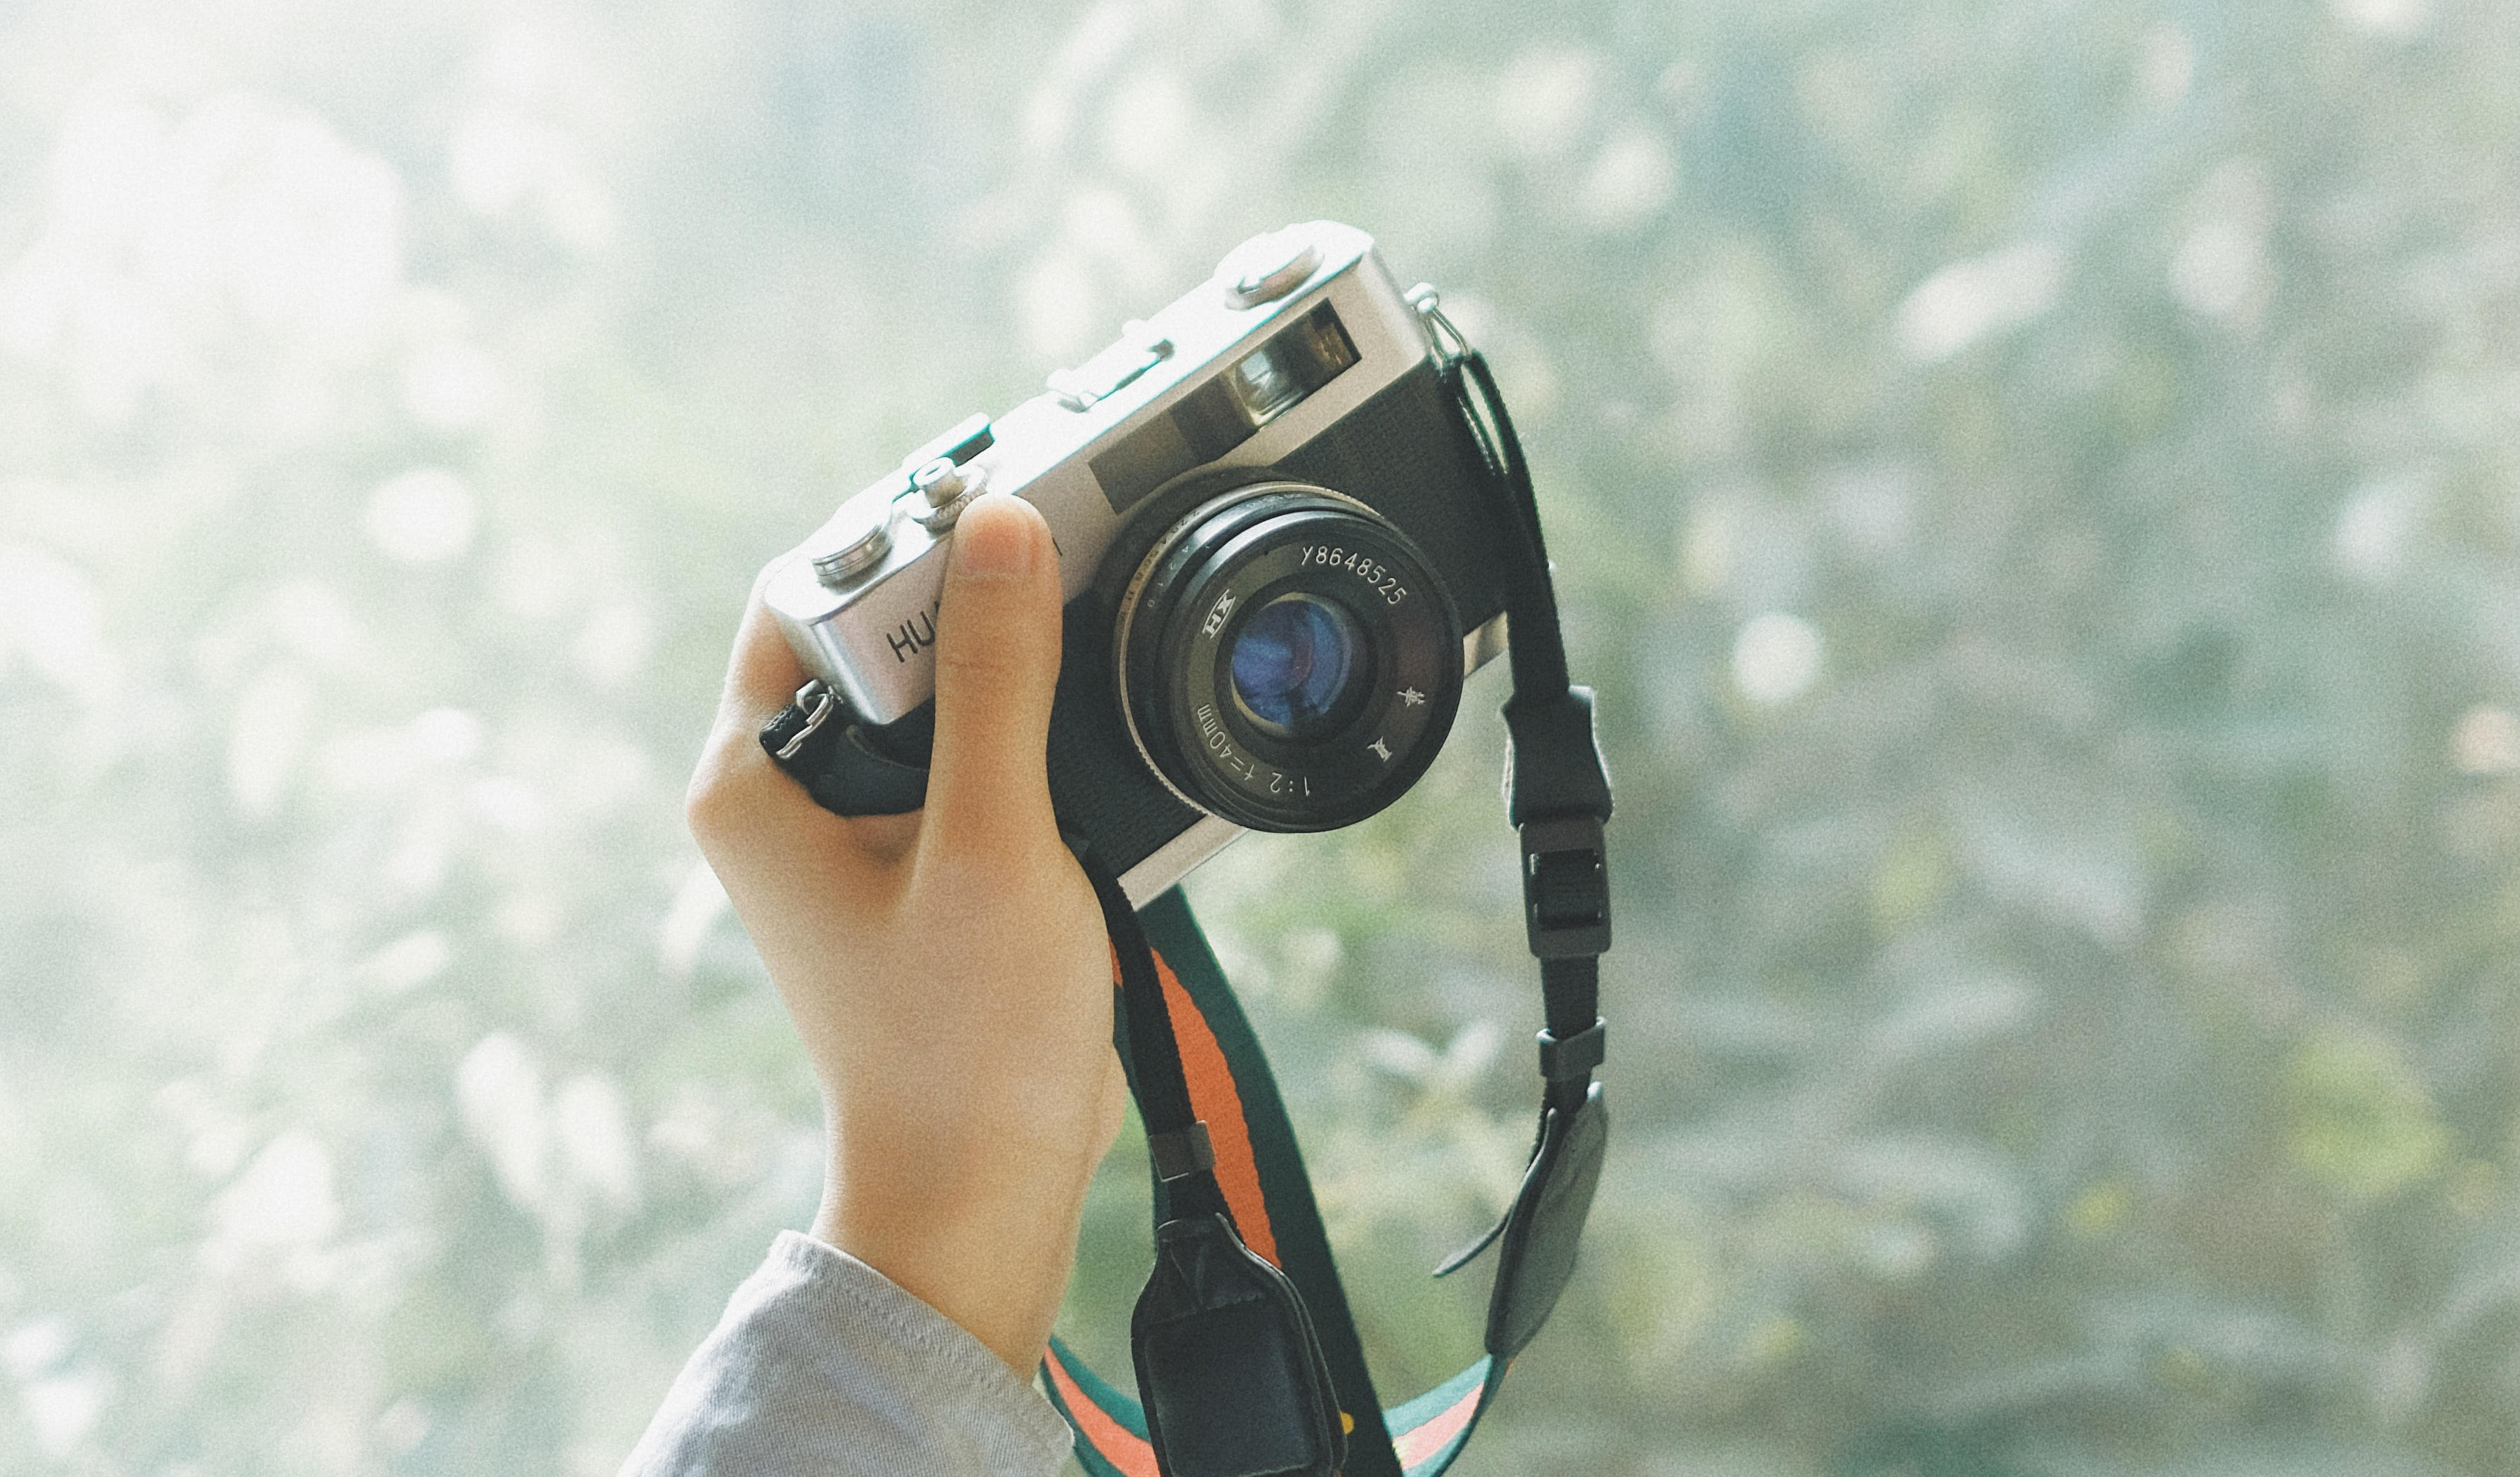 The Right Way to Attach Your Camera Strap and Avoid Disaster